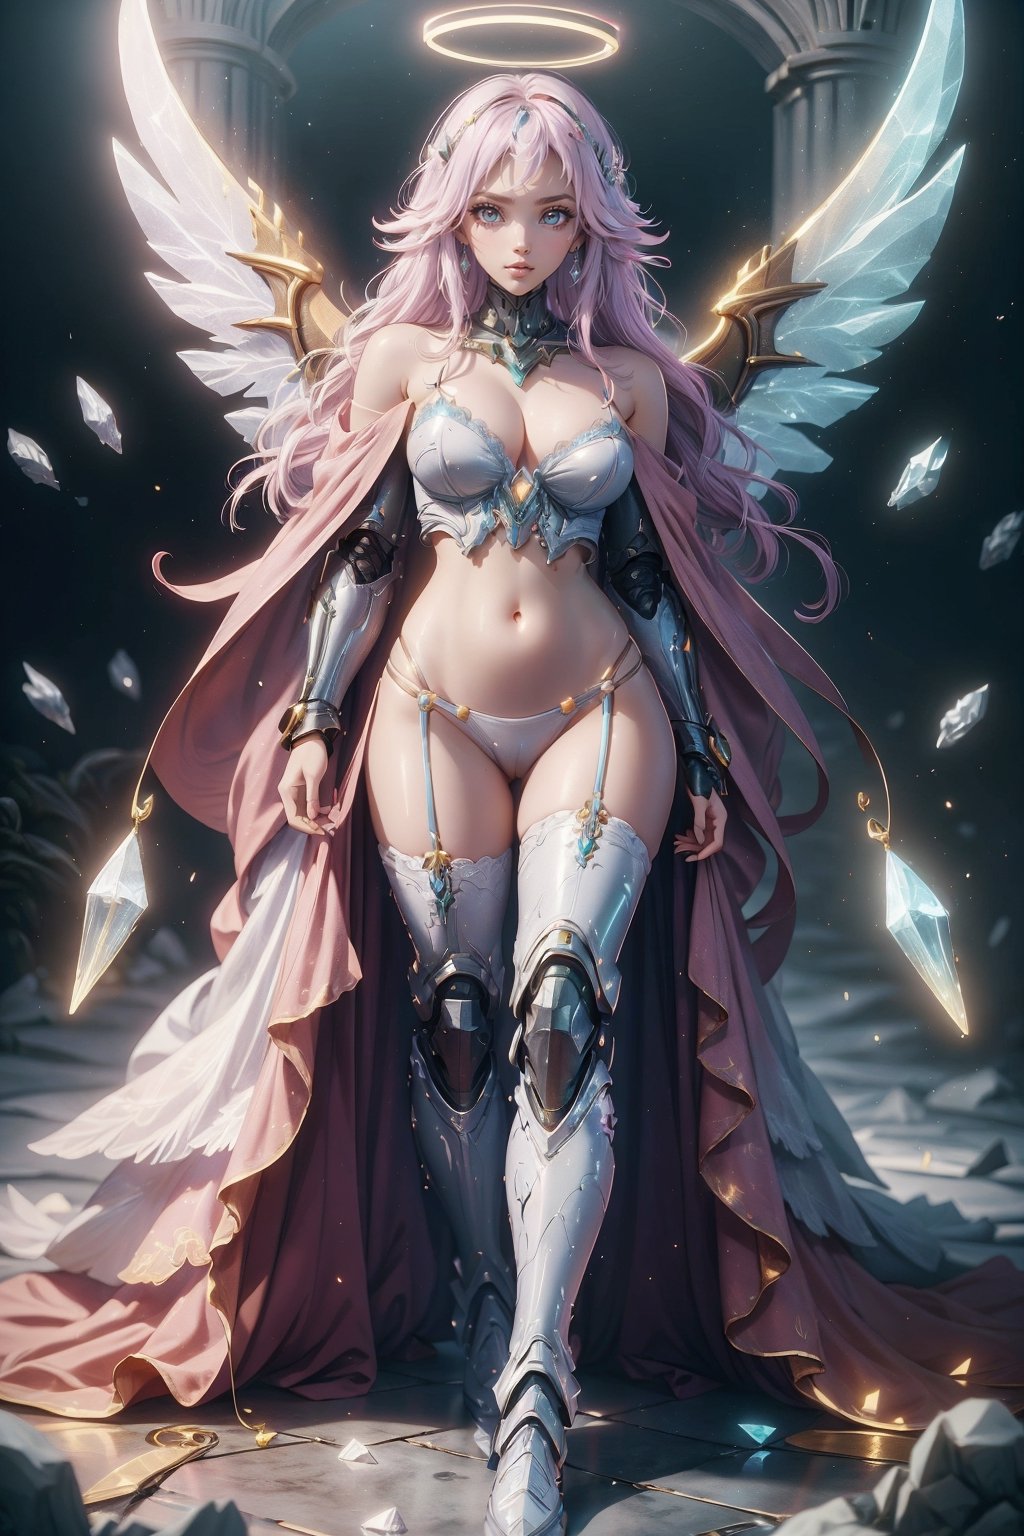 beautiful little girl, (crystal power armor), belly button, open shoulders, (power knuckles), the perfect body, (crystal little thongs), crystal hair, full body view,kardiaofrhodes
,StneRm,best quality,draconictech,blad4,blessedtech,GladysManityro,NeonST2